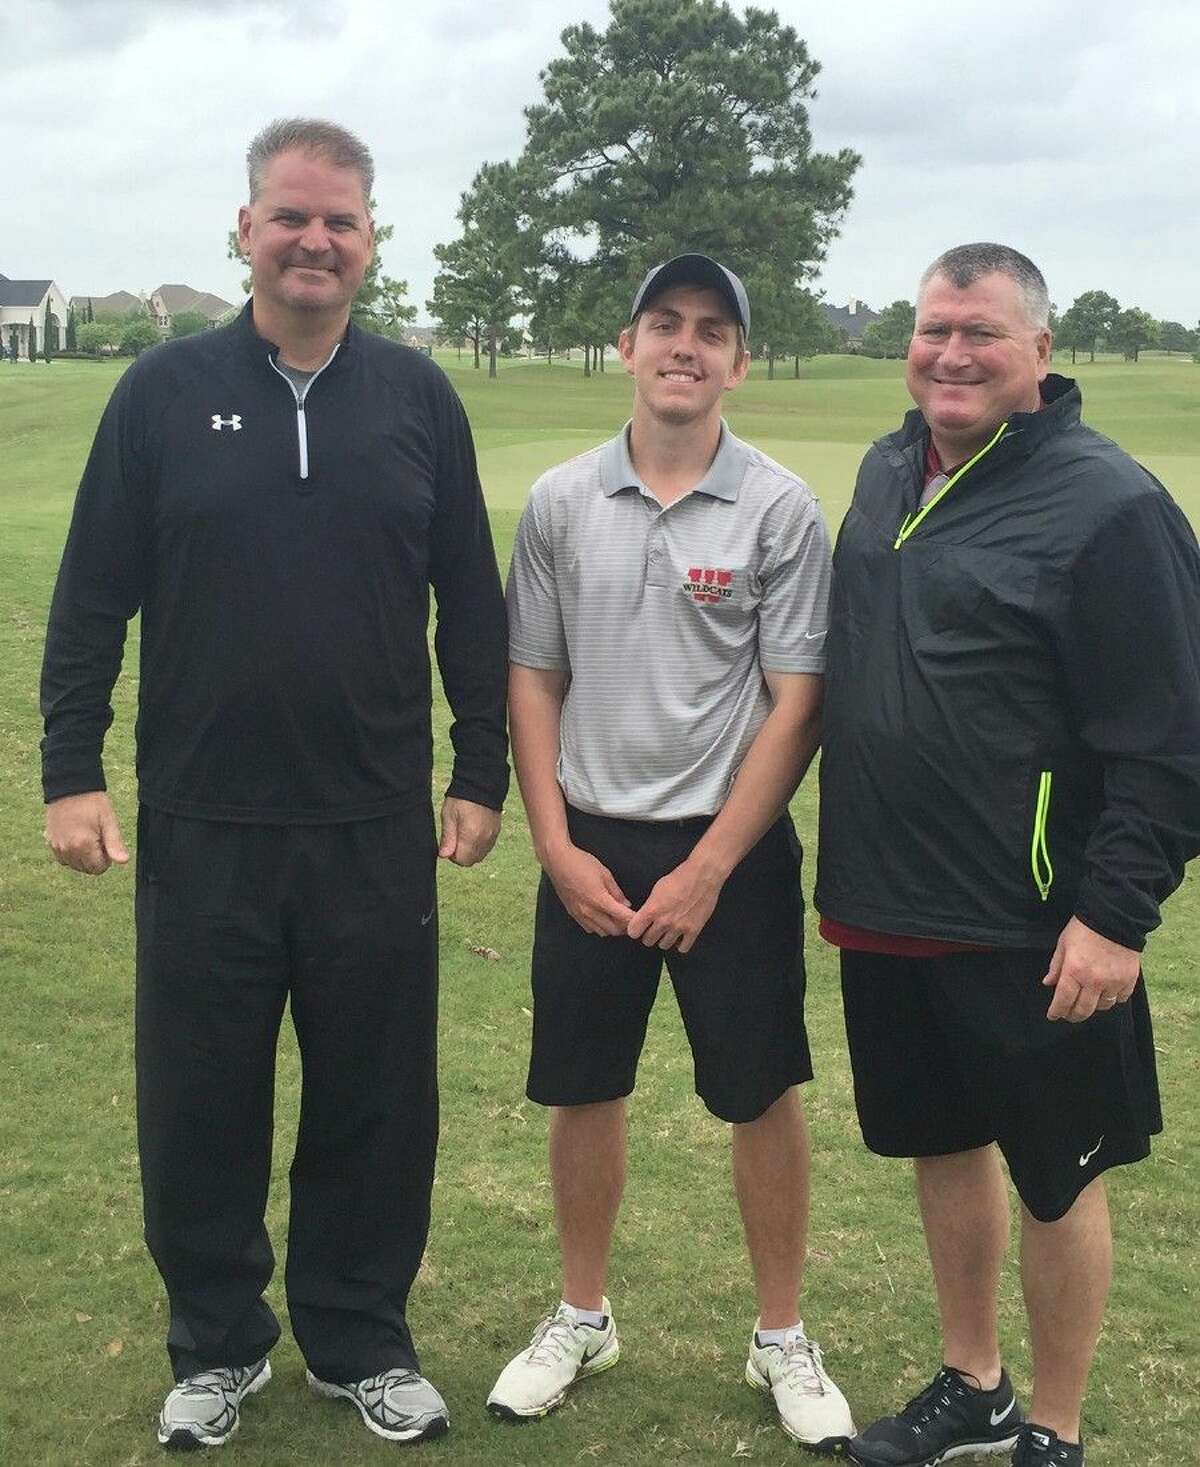 Cypress Woods High School golfer Patrick Rhodes, pictured with Head Coach Curtis Neill (left) and Campus Athletic Coordinator Trent Faith, shot a two-day score of 138 (65-73) to finish with the top score at the District 17-6A Golf Tournament.